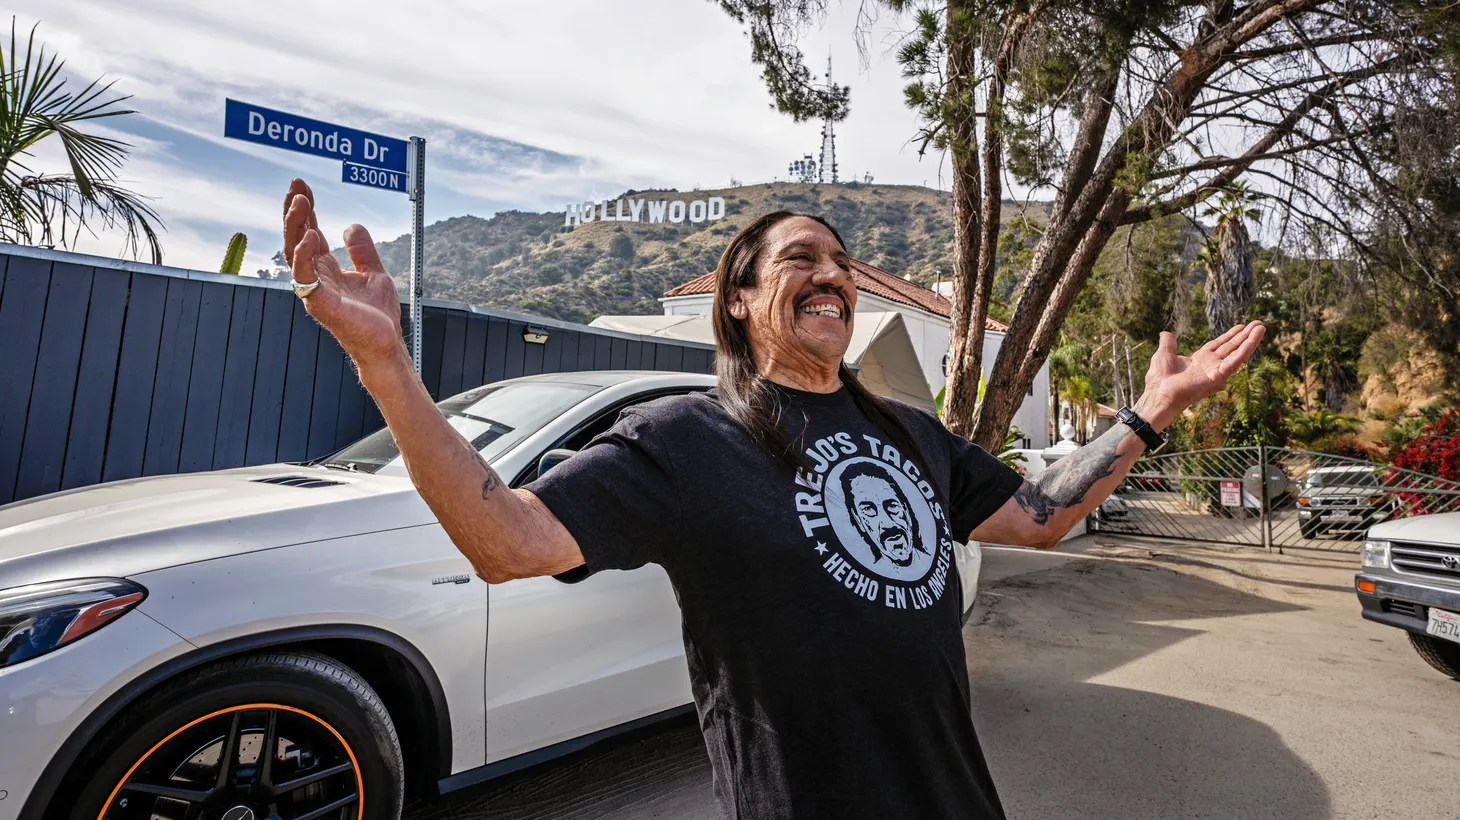 Danny Trejo made the leap from the penitentiary to Hollywood with the film “Runaway Train” in 1985, and he hasn’t looked back since then.